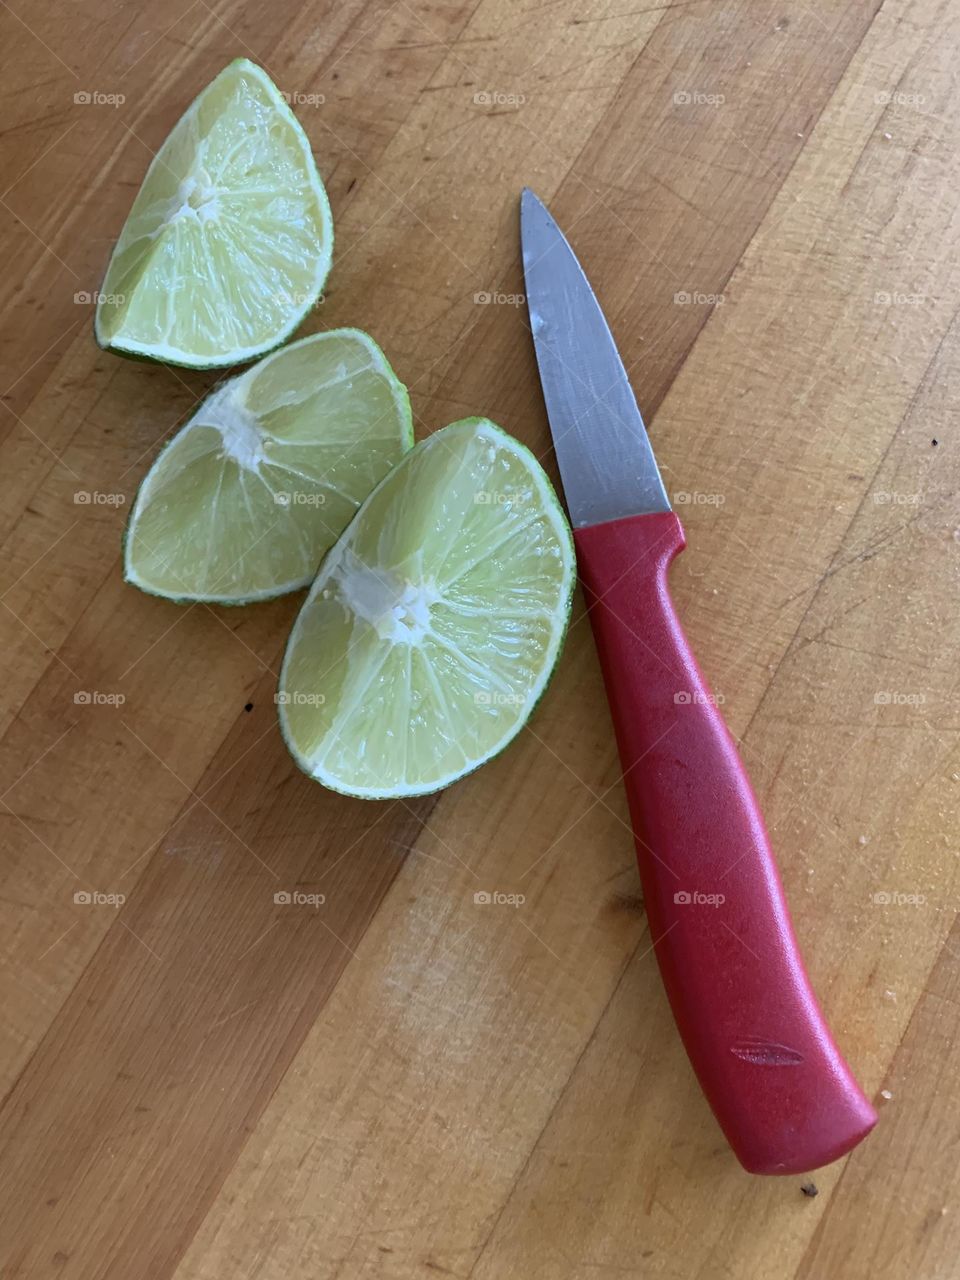 Lime wedges and knife